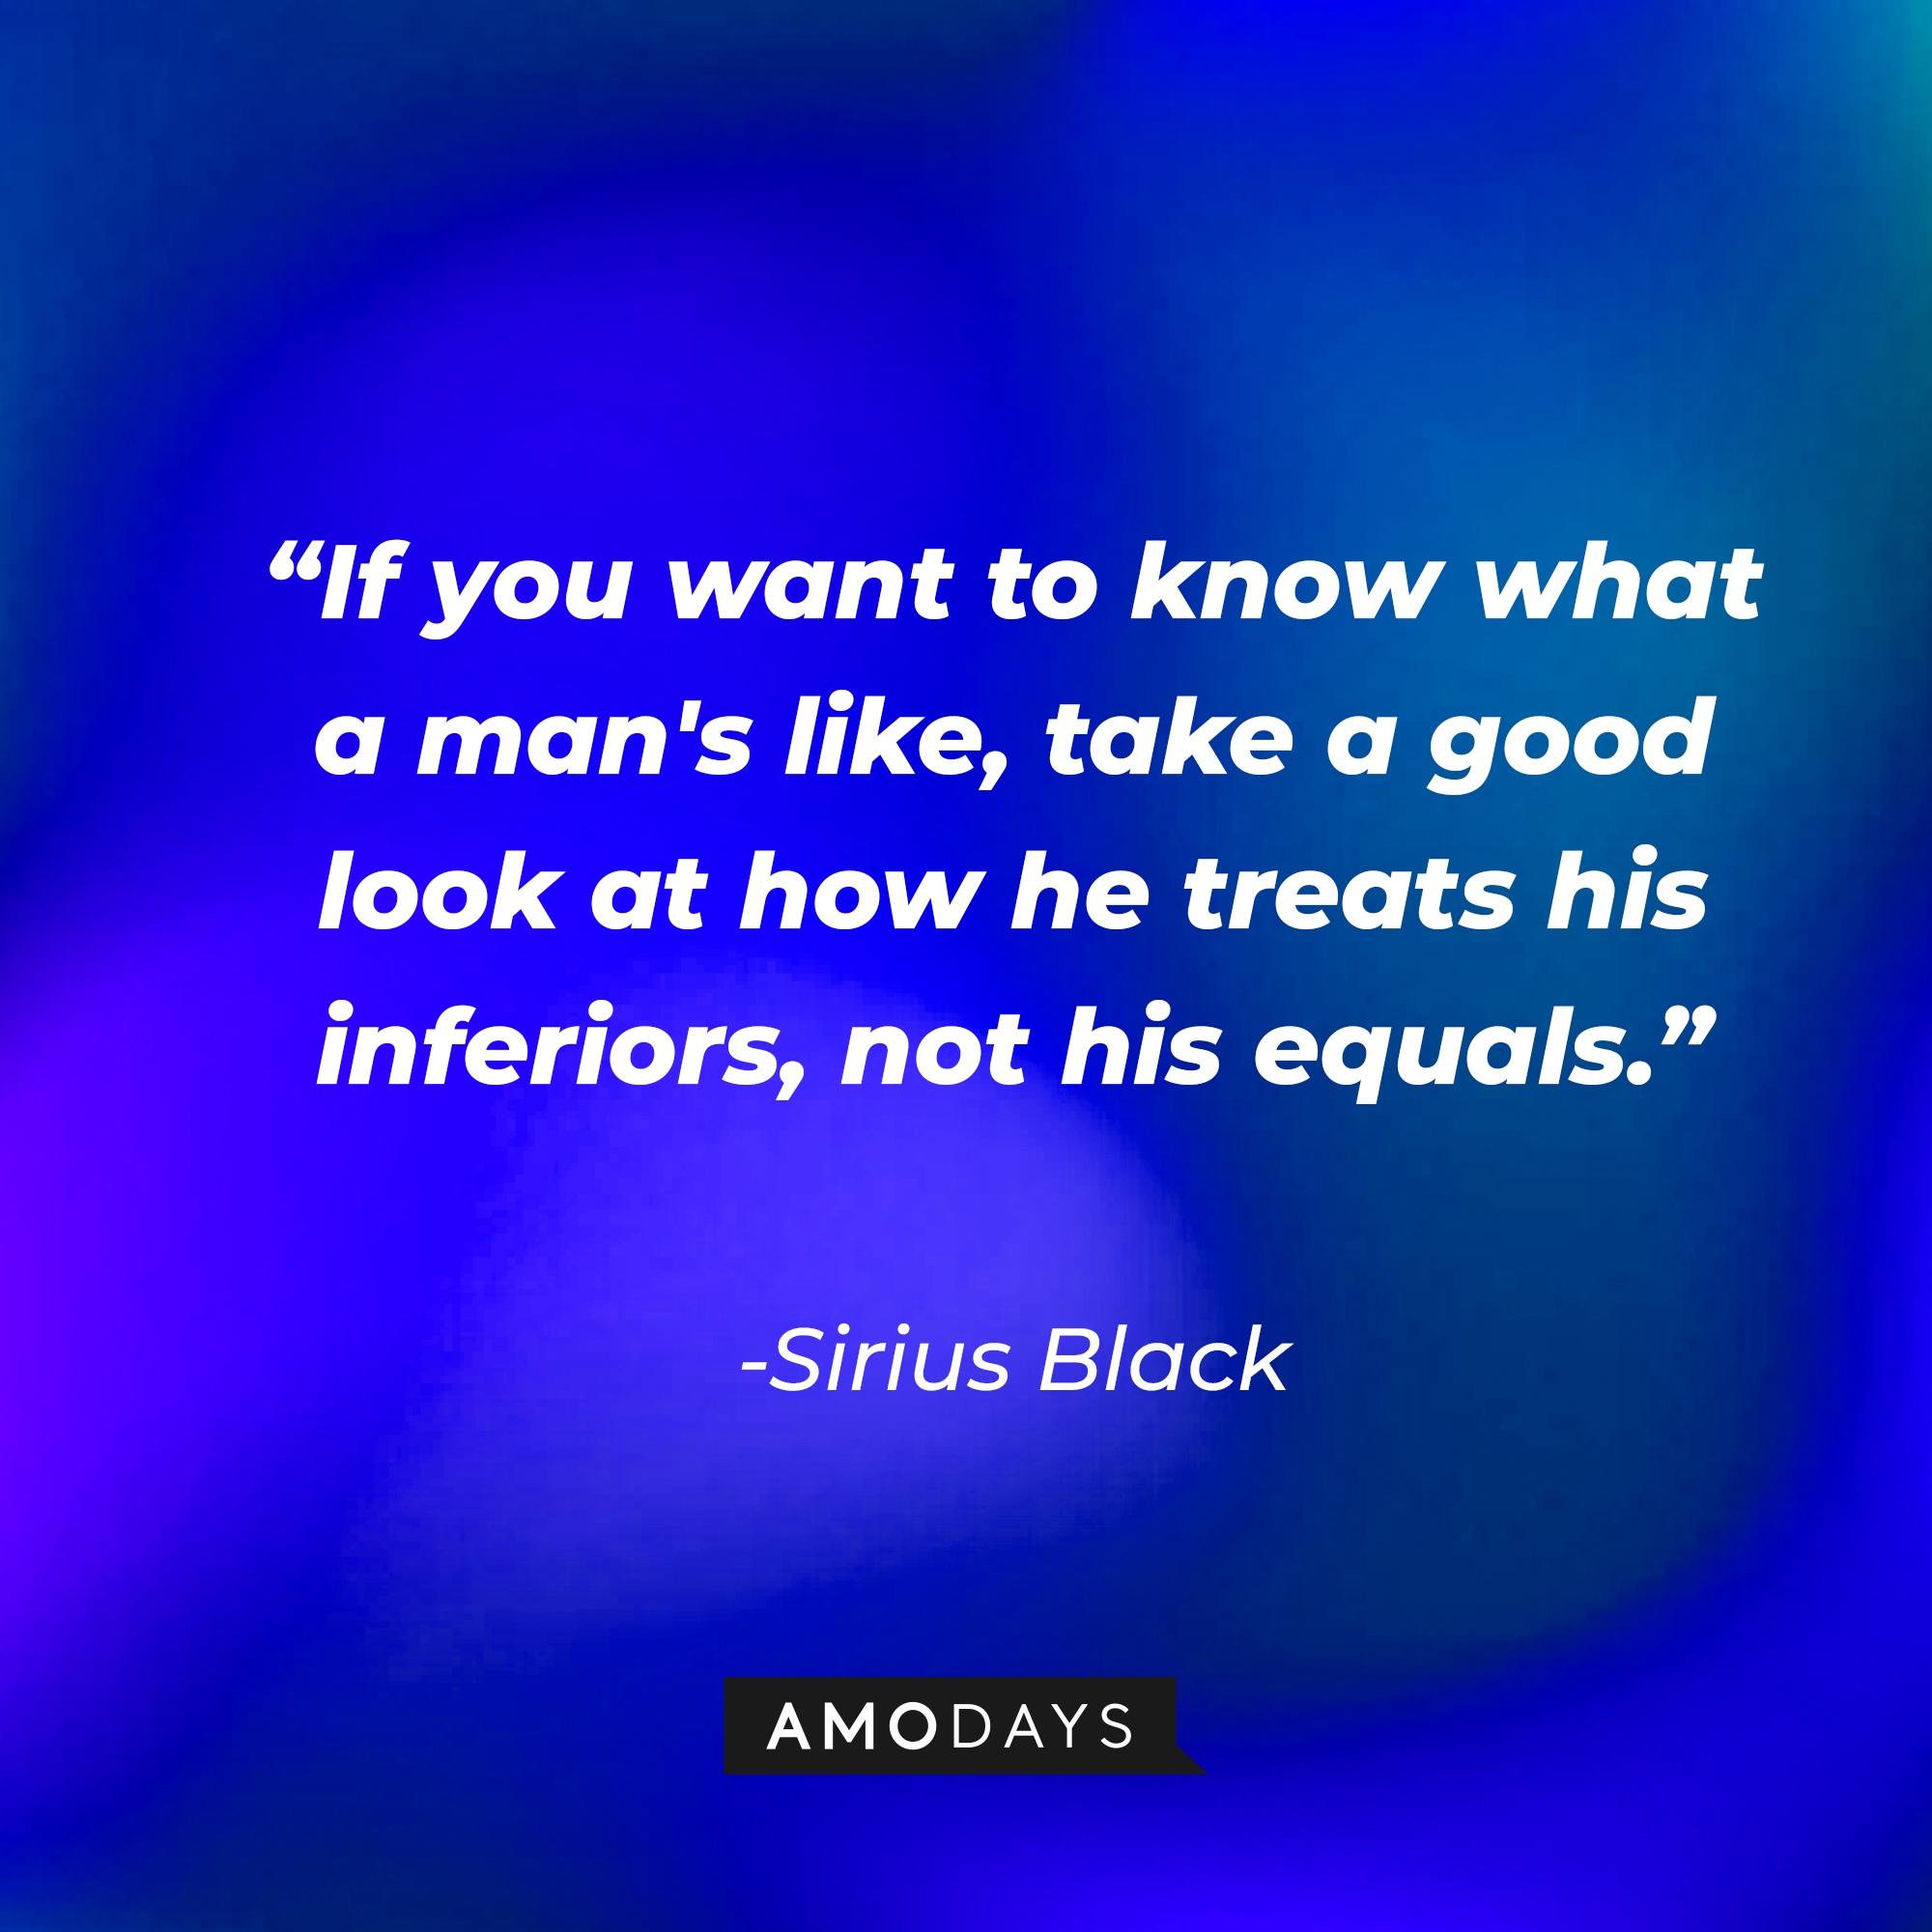 Sirius Black's quote: “If you want to know what a man's like, take a good look at how he treats his inferiors, not his equals.” | Image: Amodays